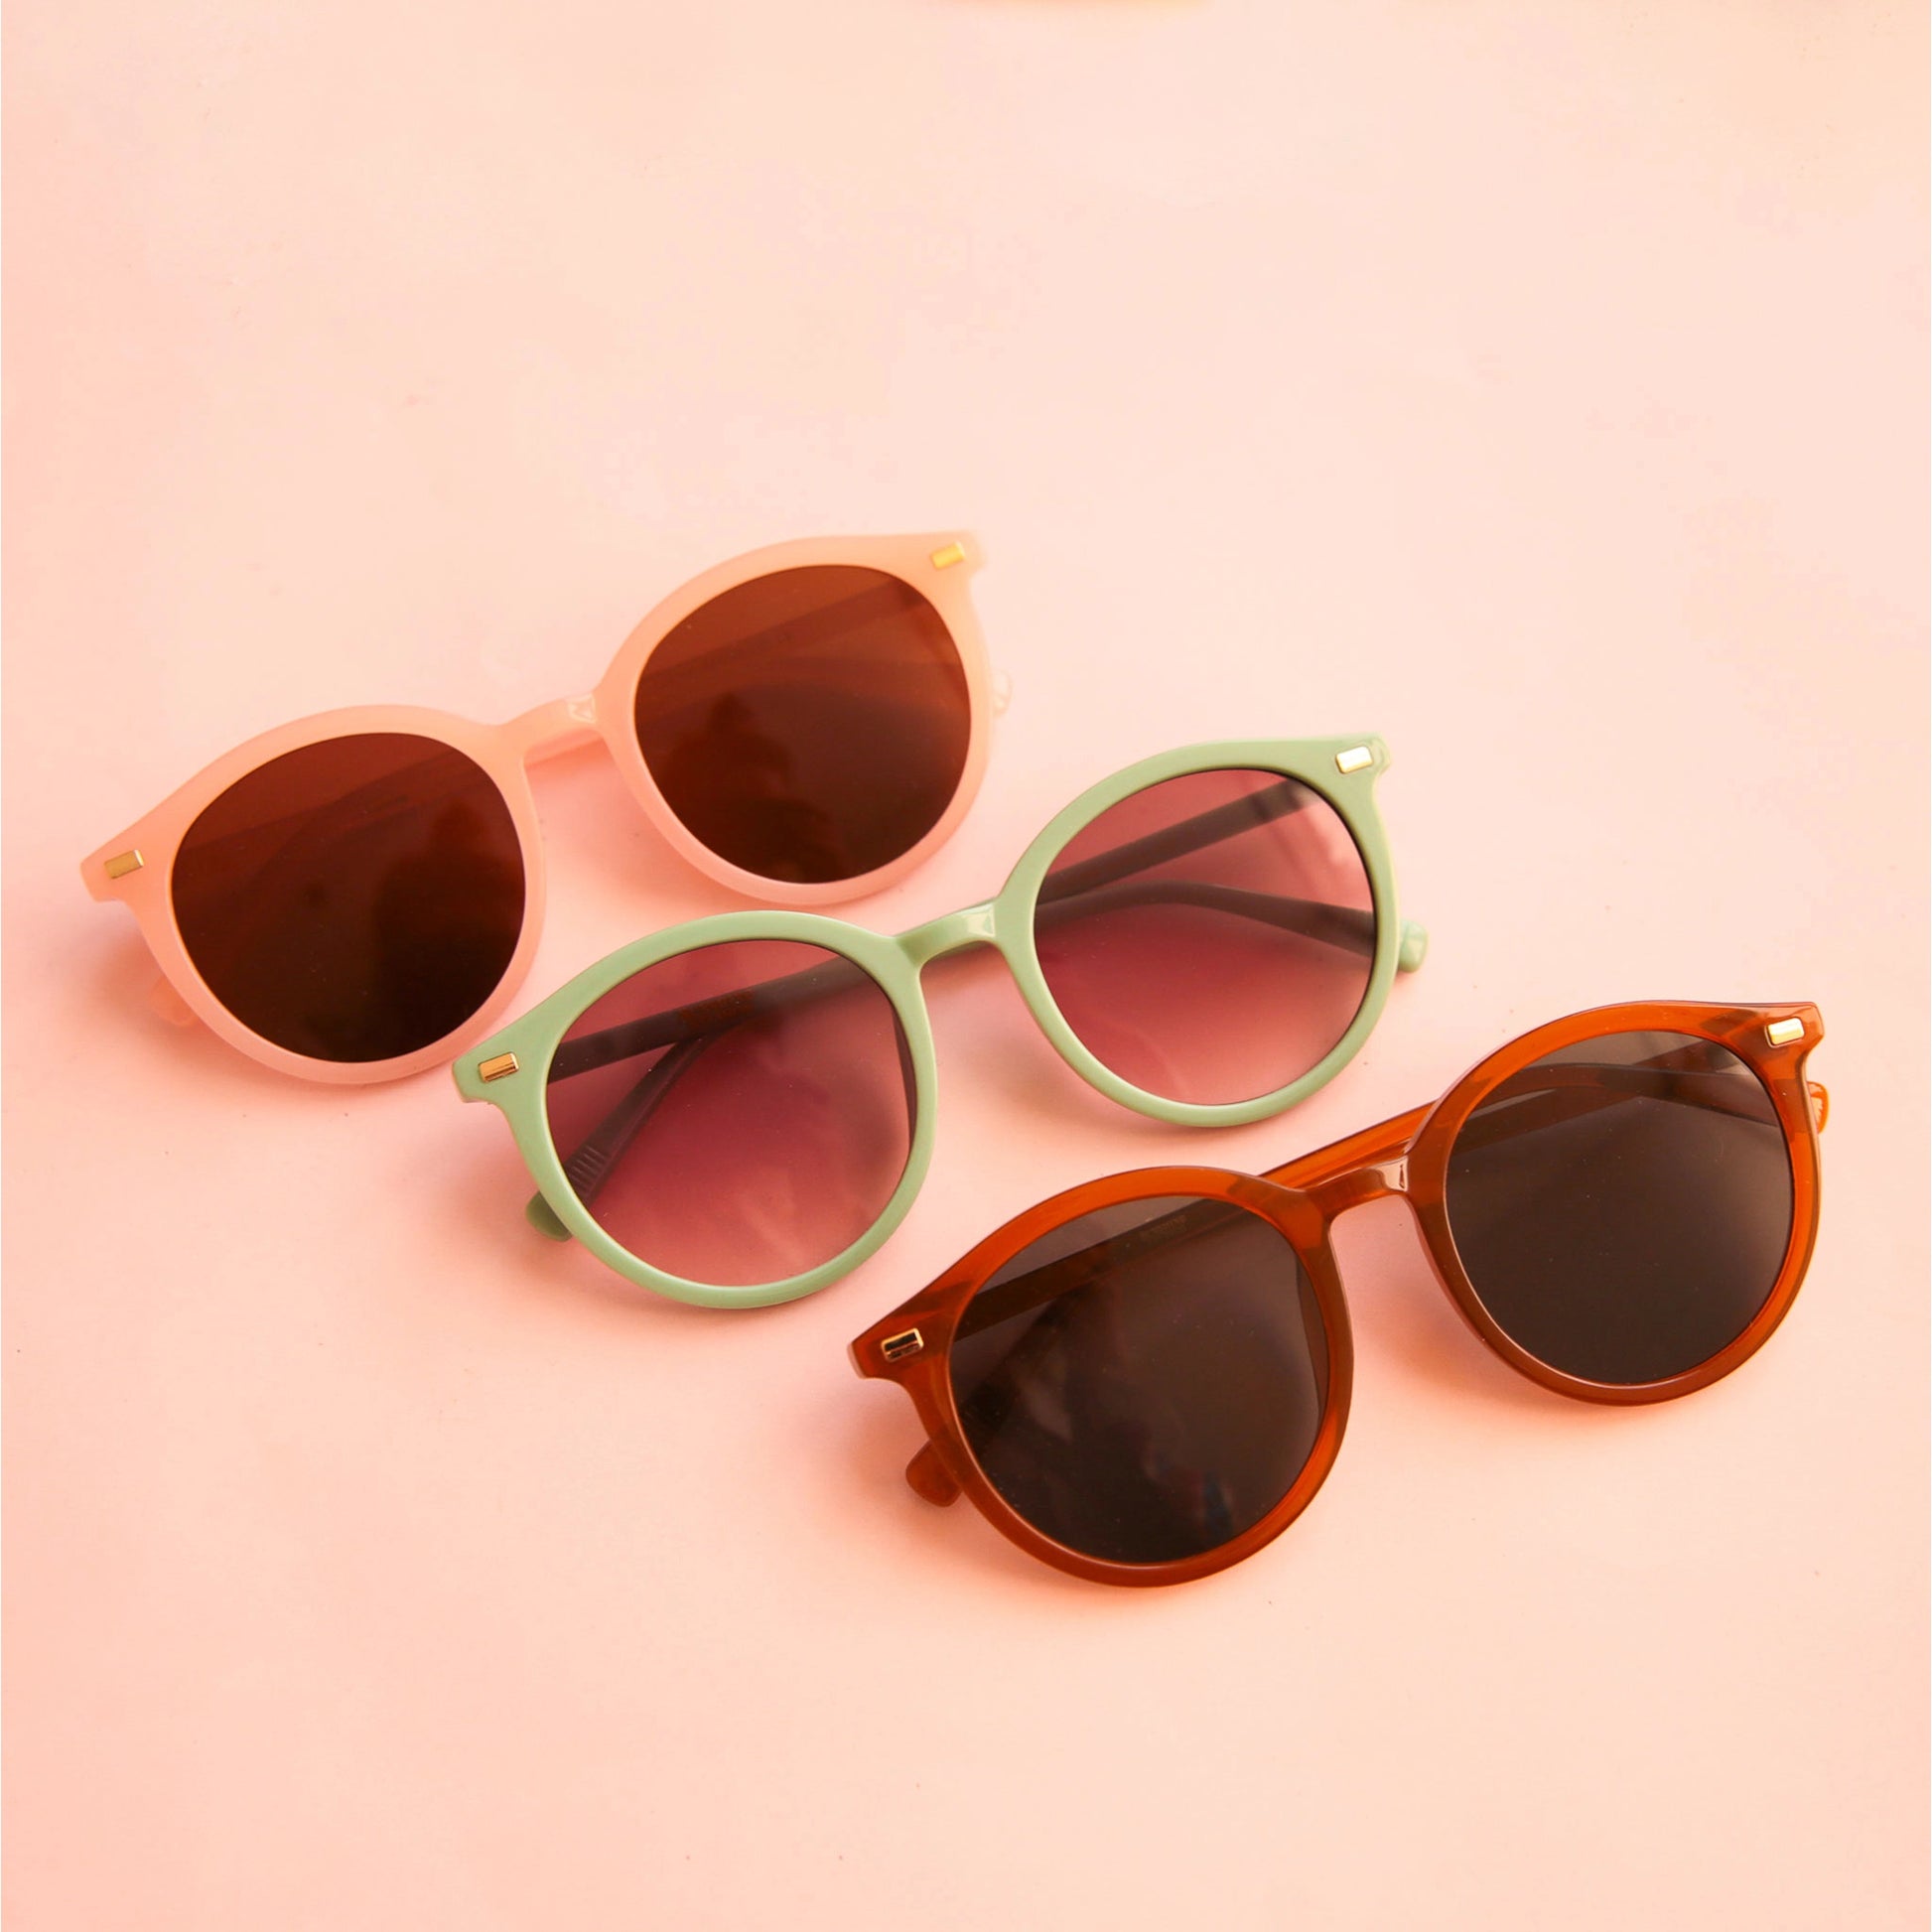 On a peach background is the three Sam sunglasses in the three color ways.